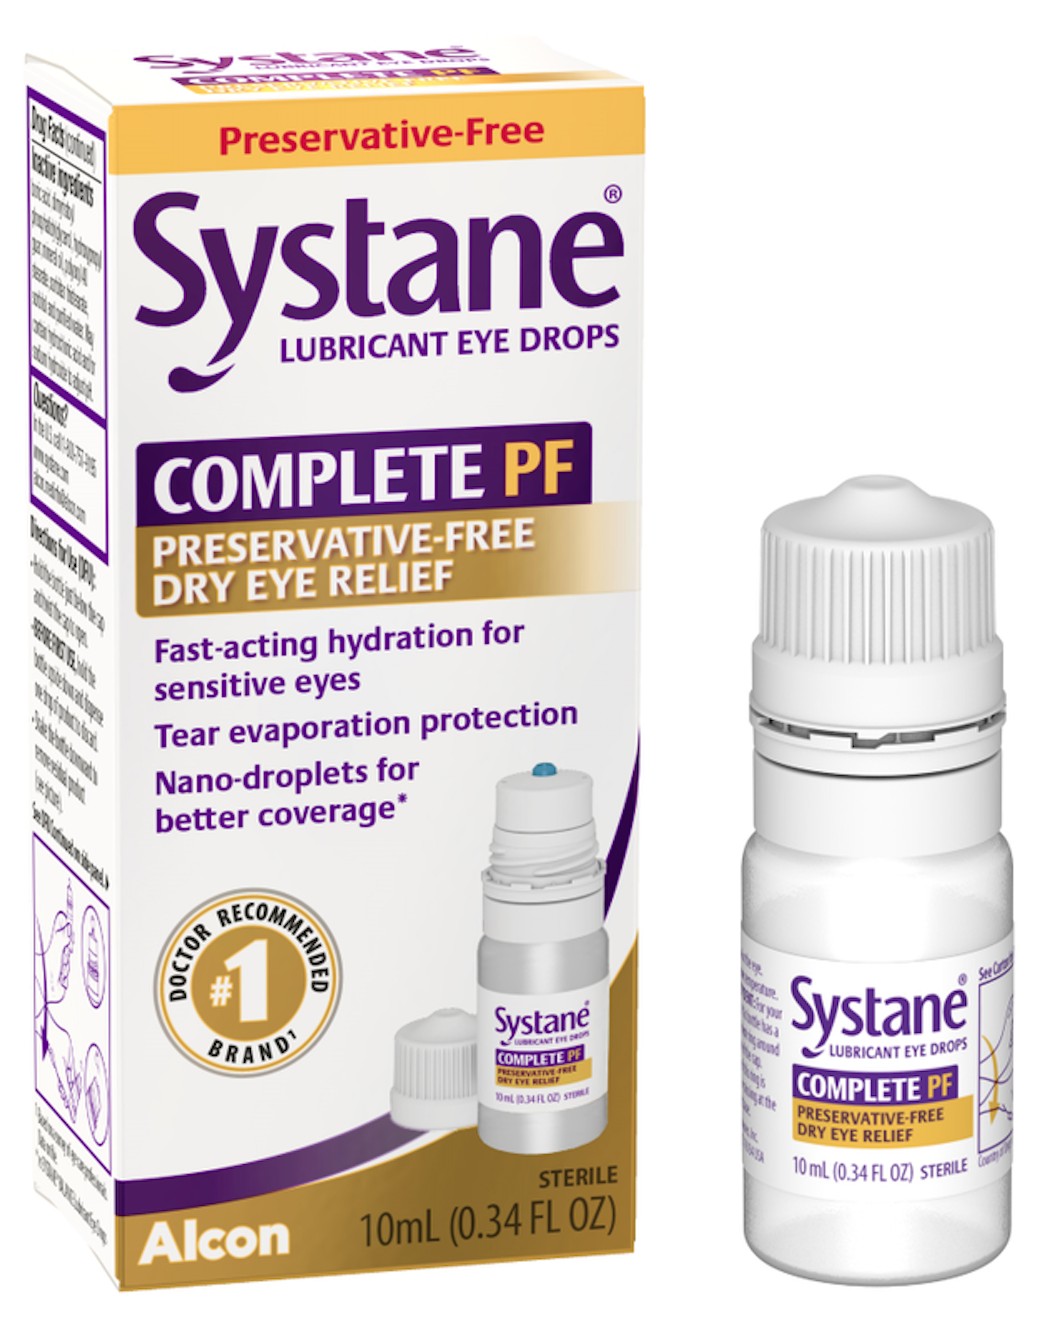 Alcon partners with actress Kate Walsh on US launch of Systane dry eye drops